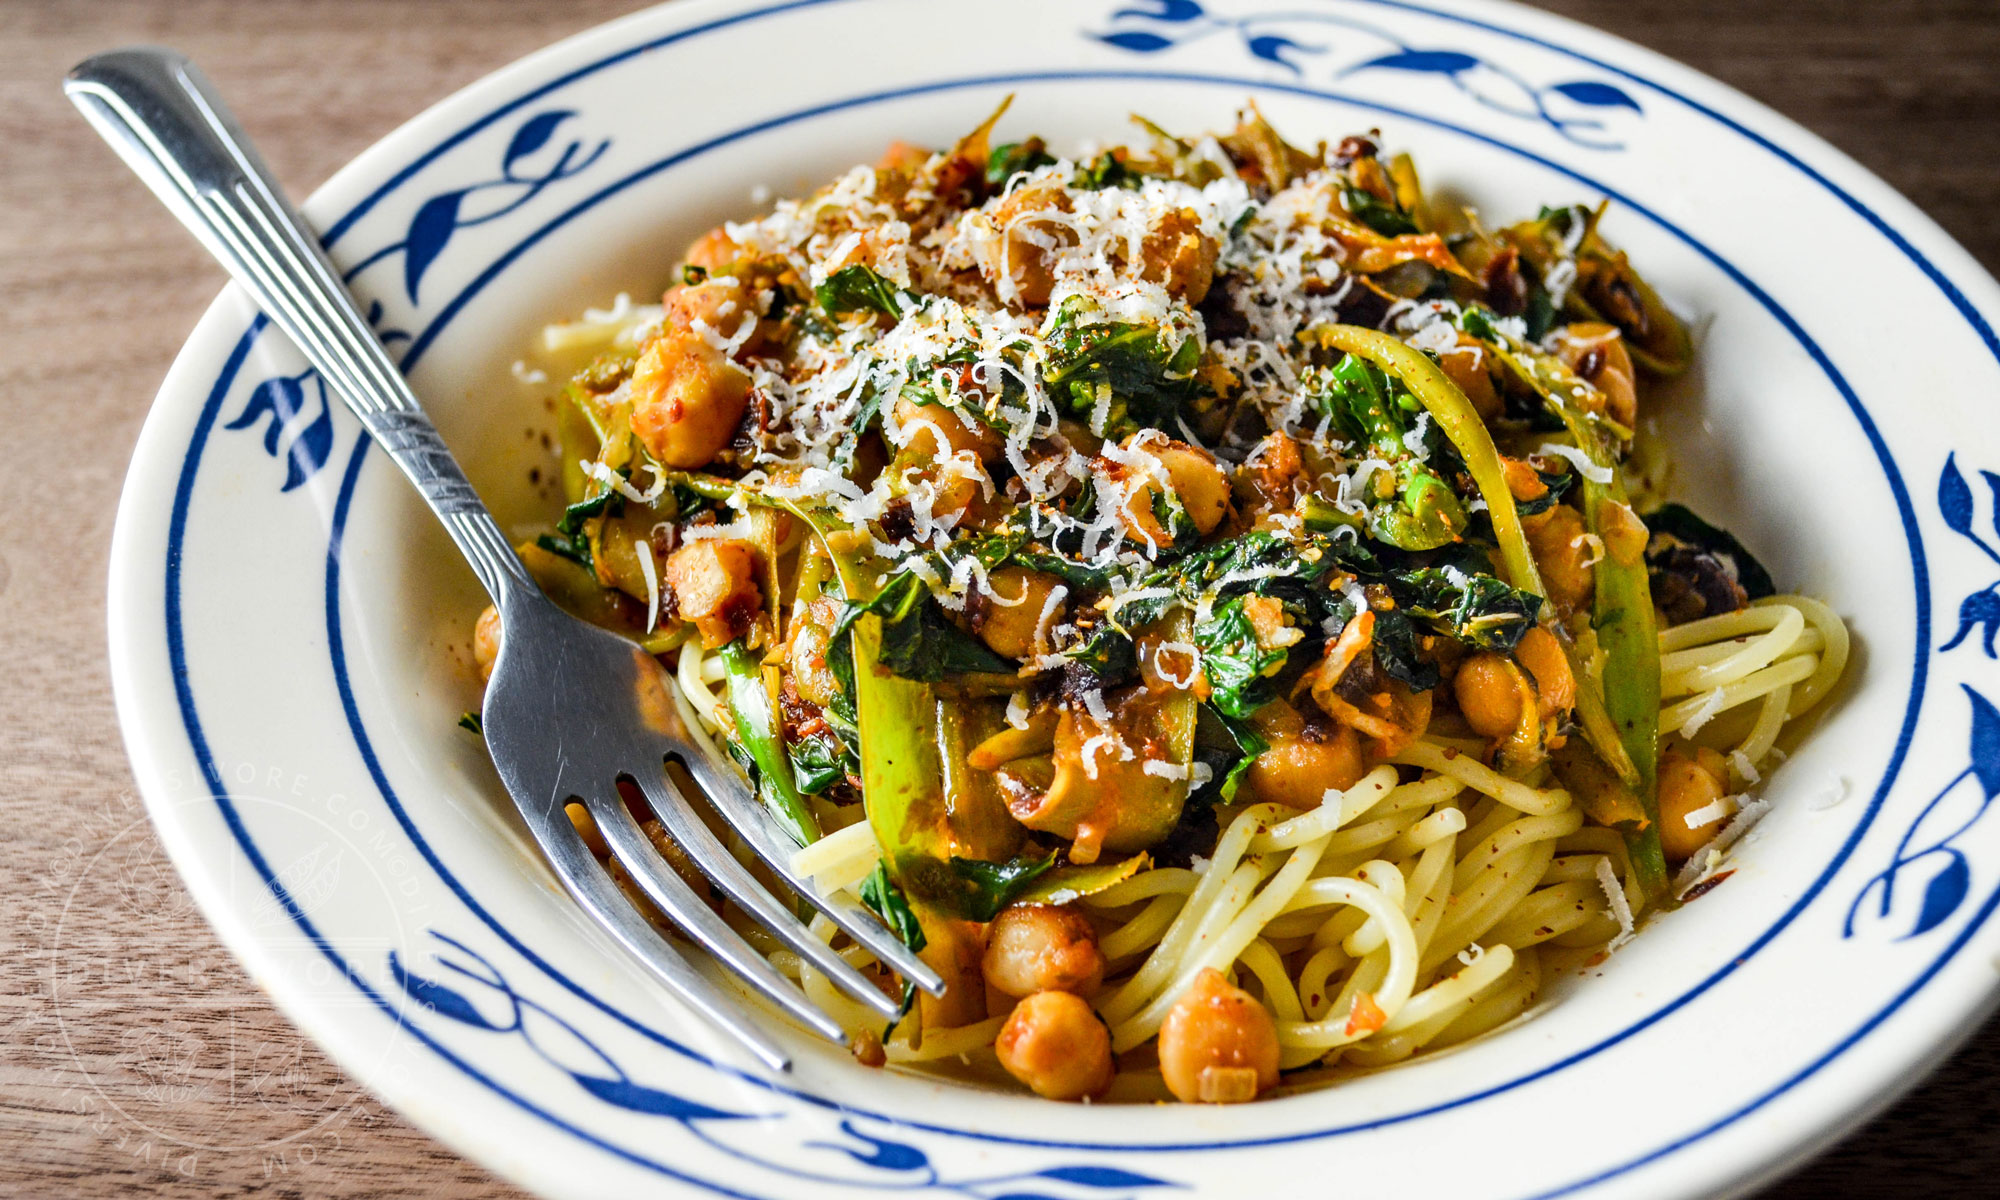 Chickpea and Gai Lan Spaghettini in a blue and white bowl with a fork